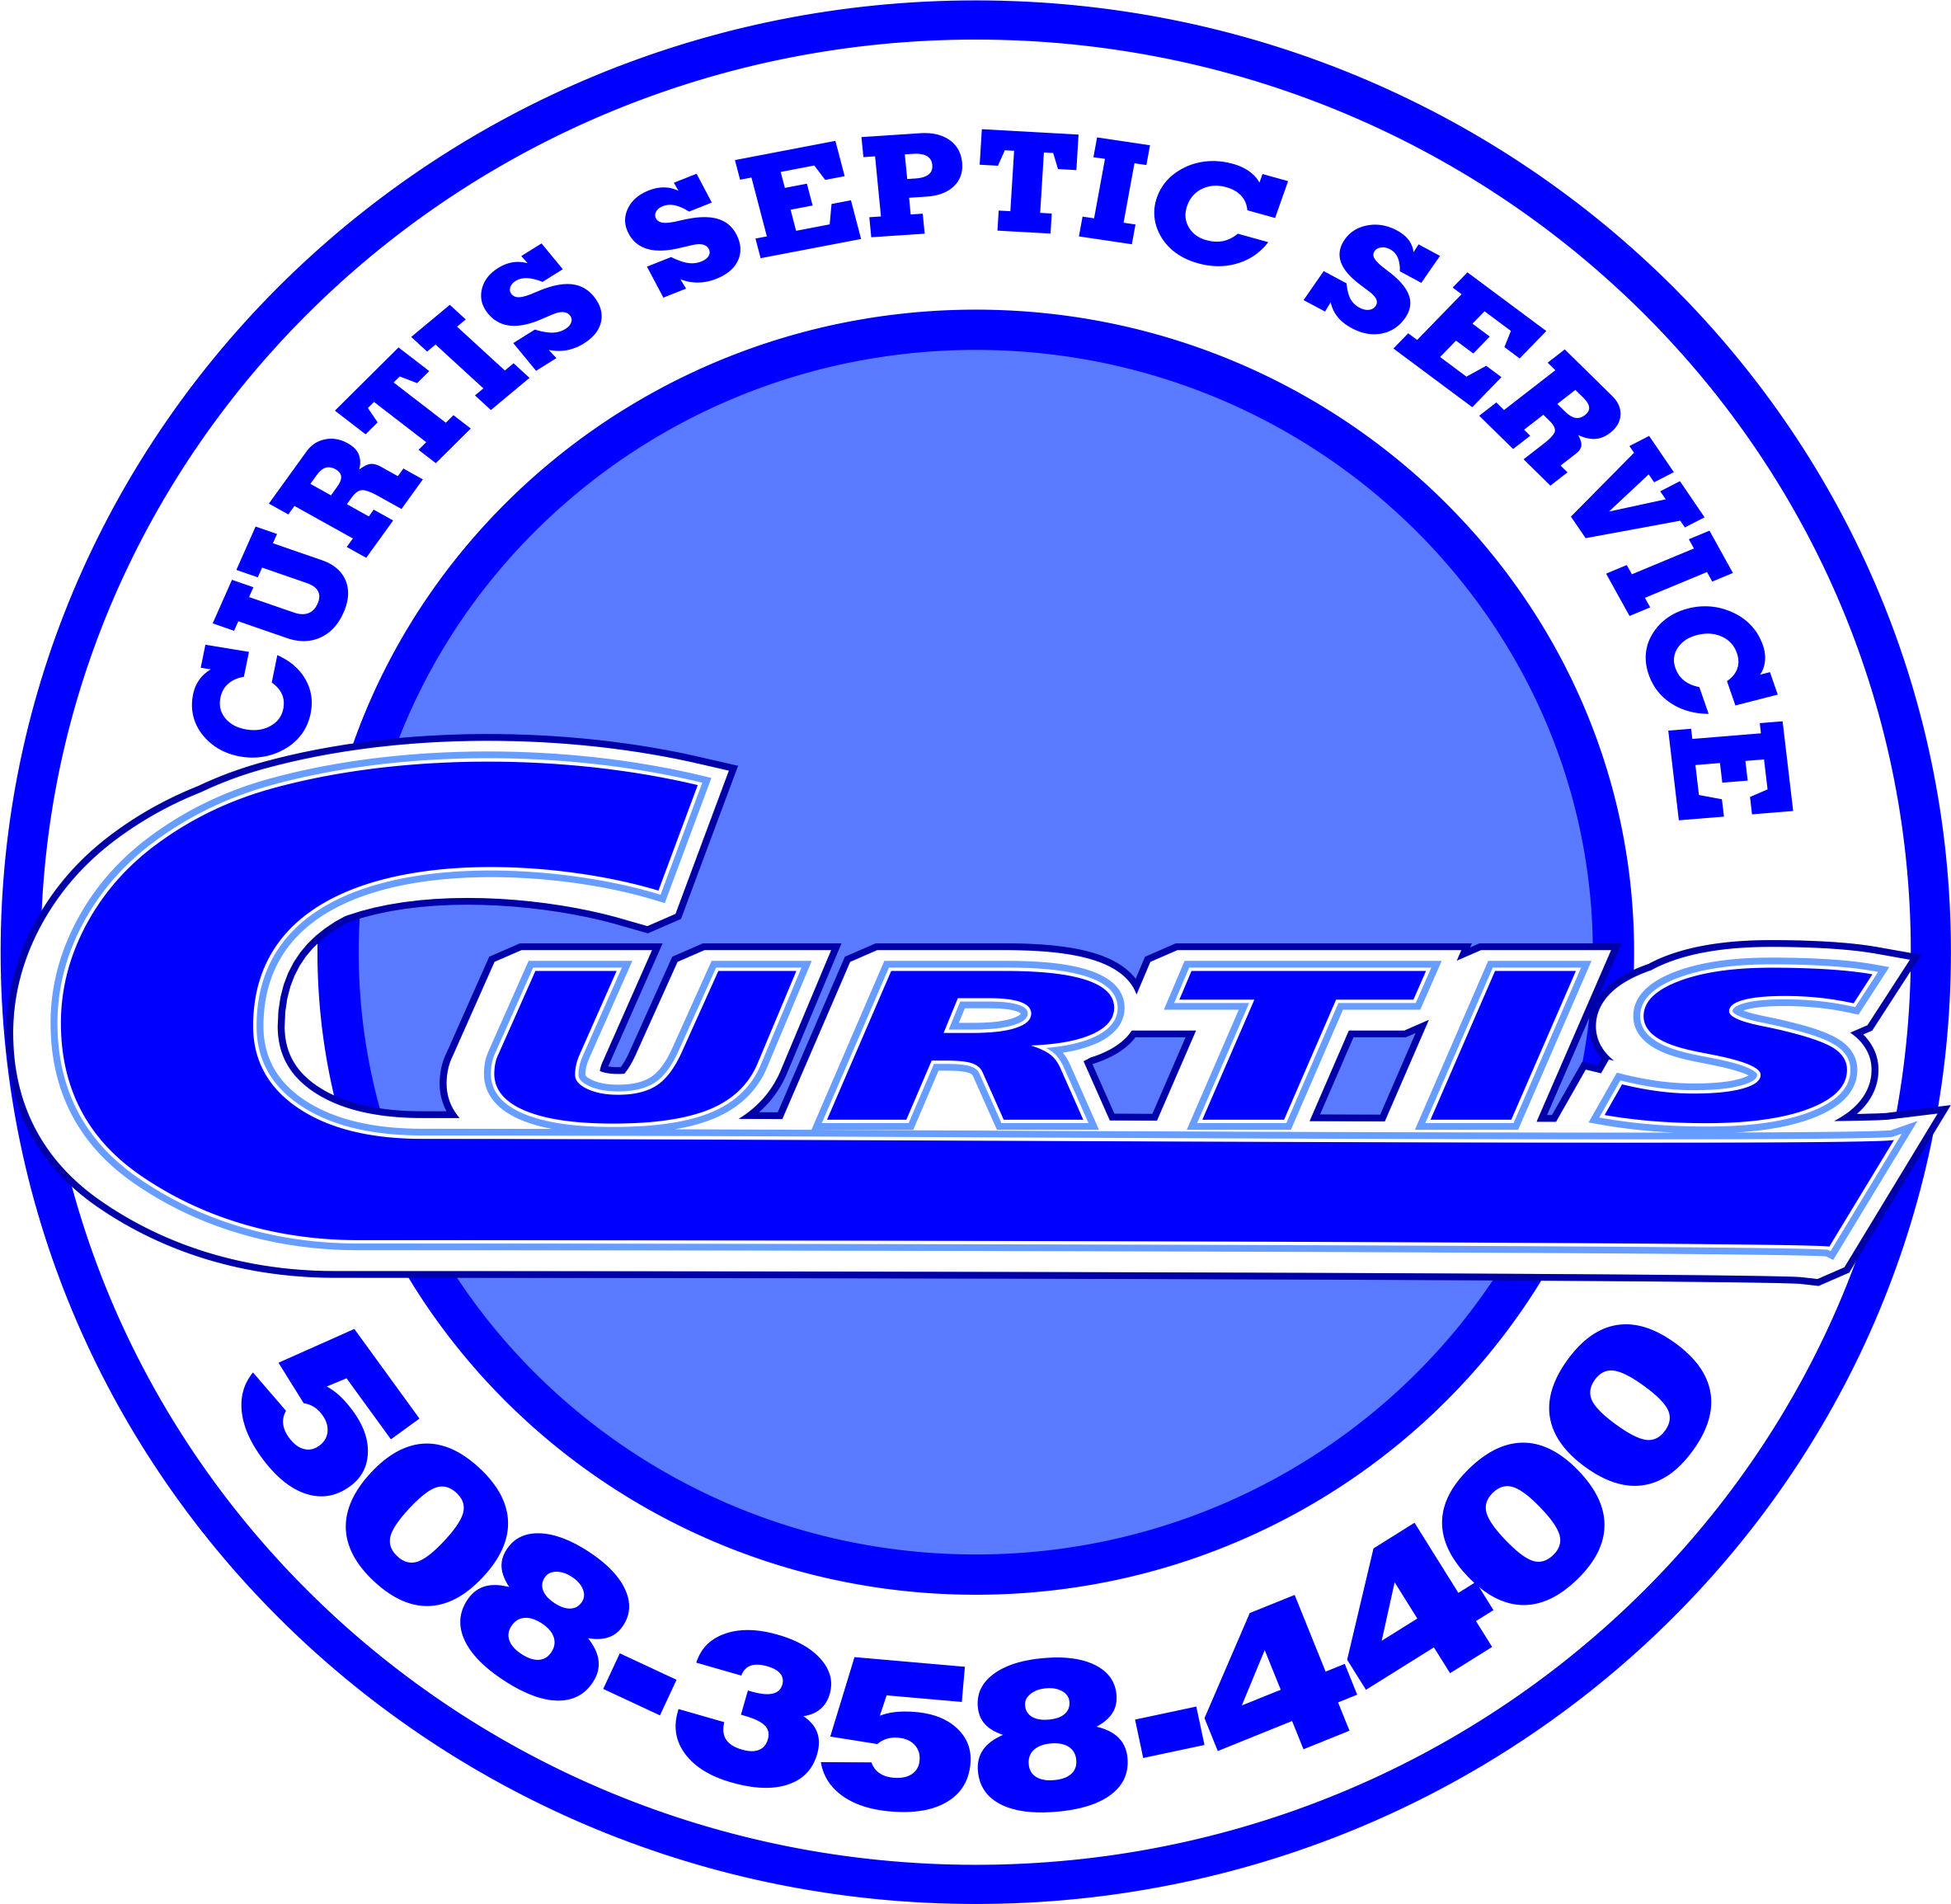 Septic system inspectors in Ayer, MA.